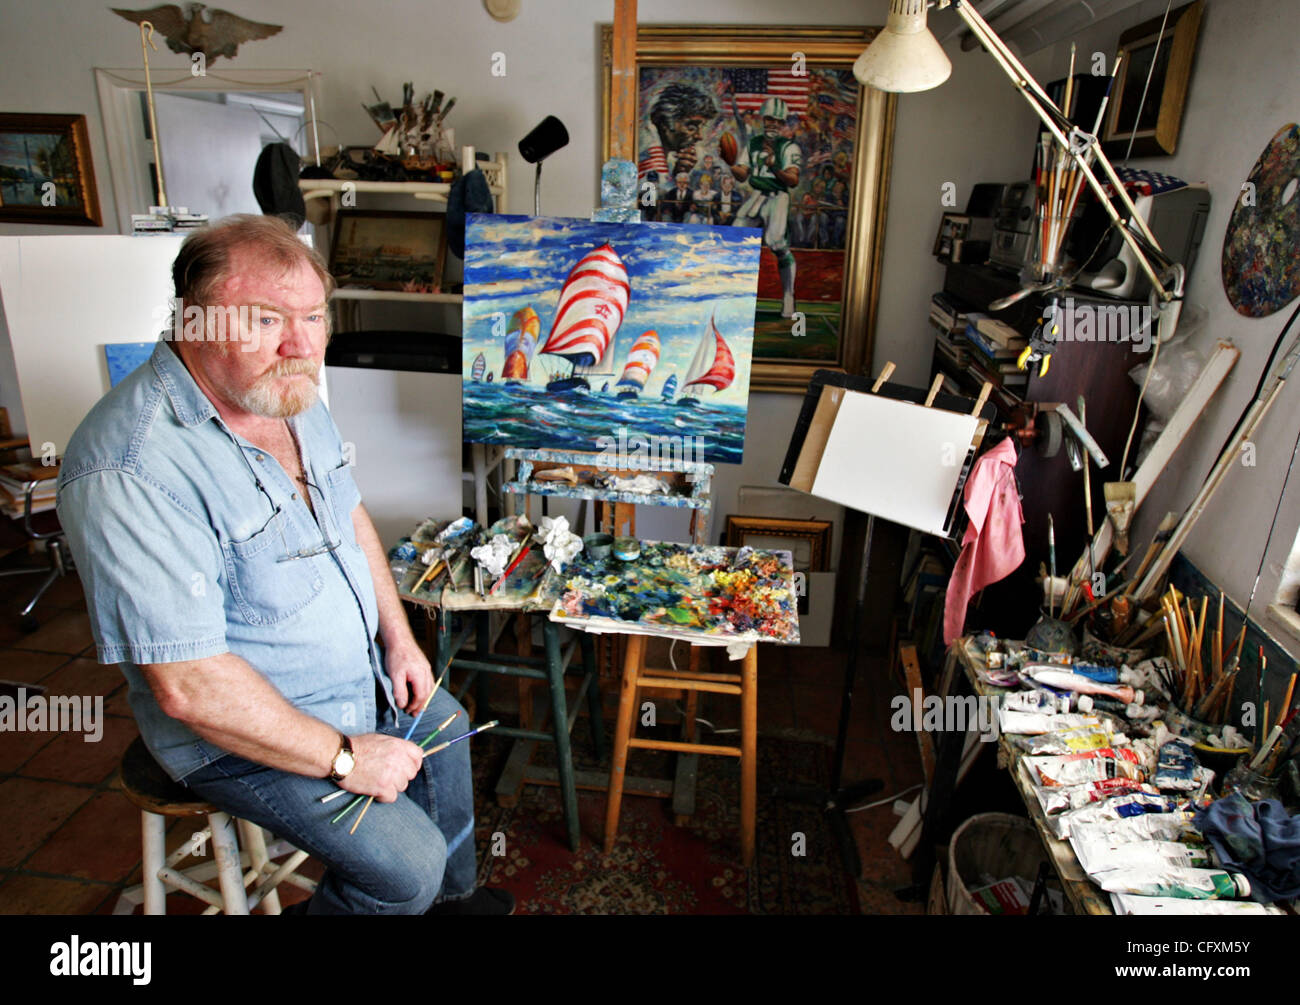 041907 met CORLEY Staff photo by Richard Graulich/The Palm Beach Post  0036785A LAKE WORTH - Philip Corley stands in his Lake Worth apartment  studio Thursday. Corley is an artist, who like others